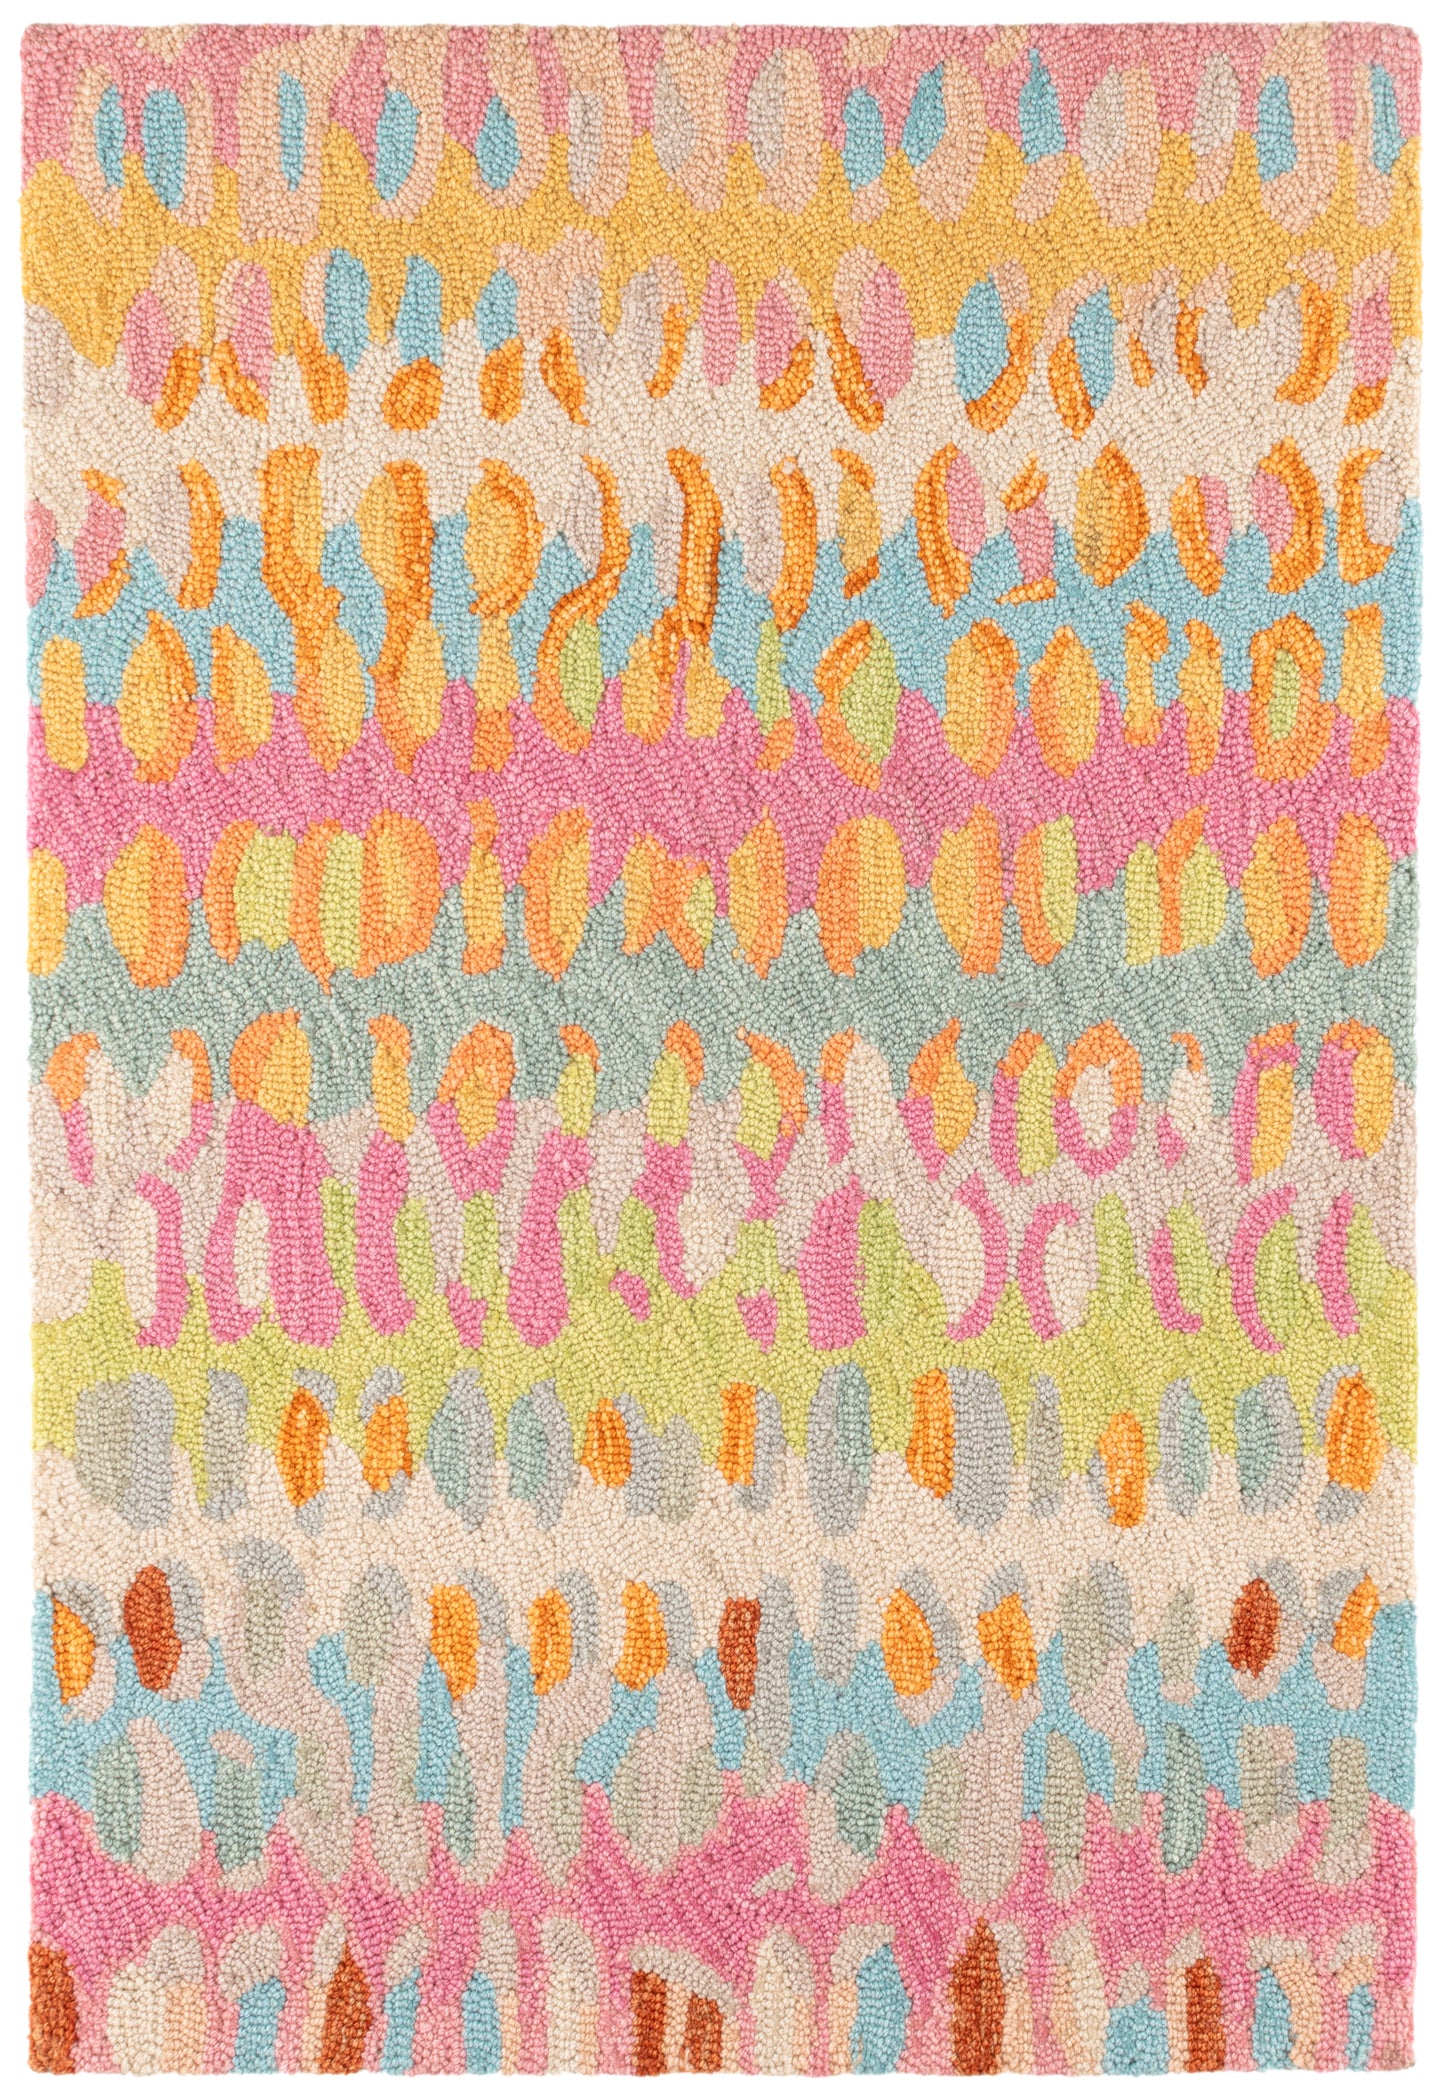 Rug - Micro Hooked Wool - Paint Chip Confetti